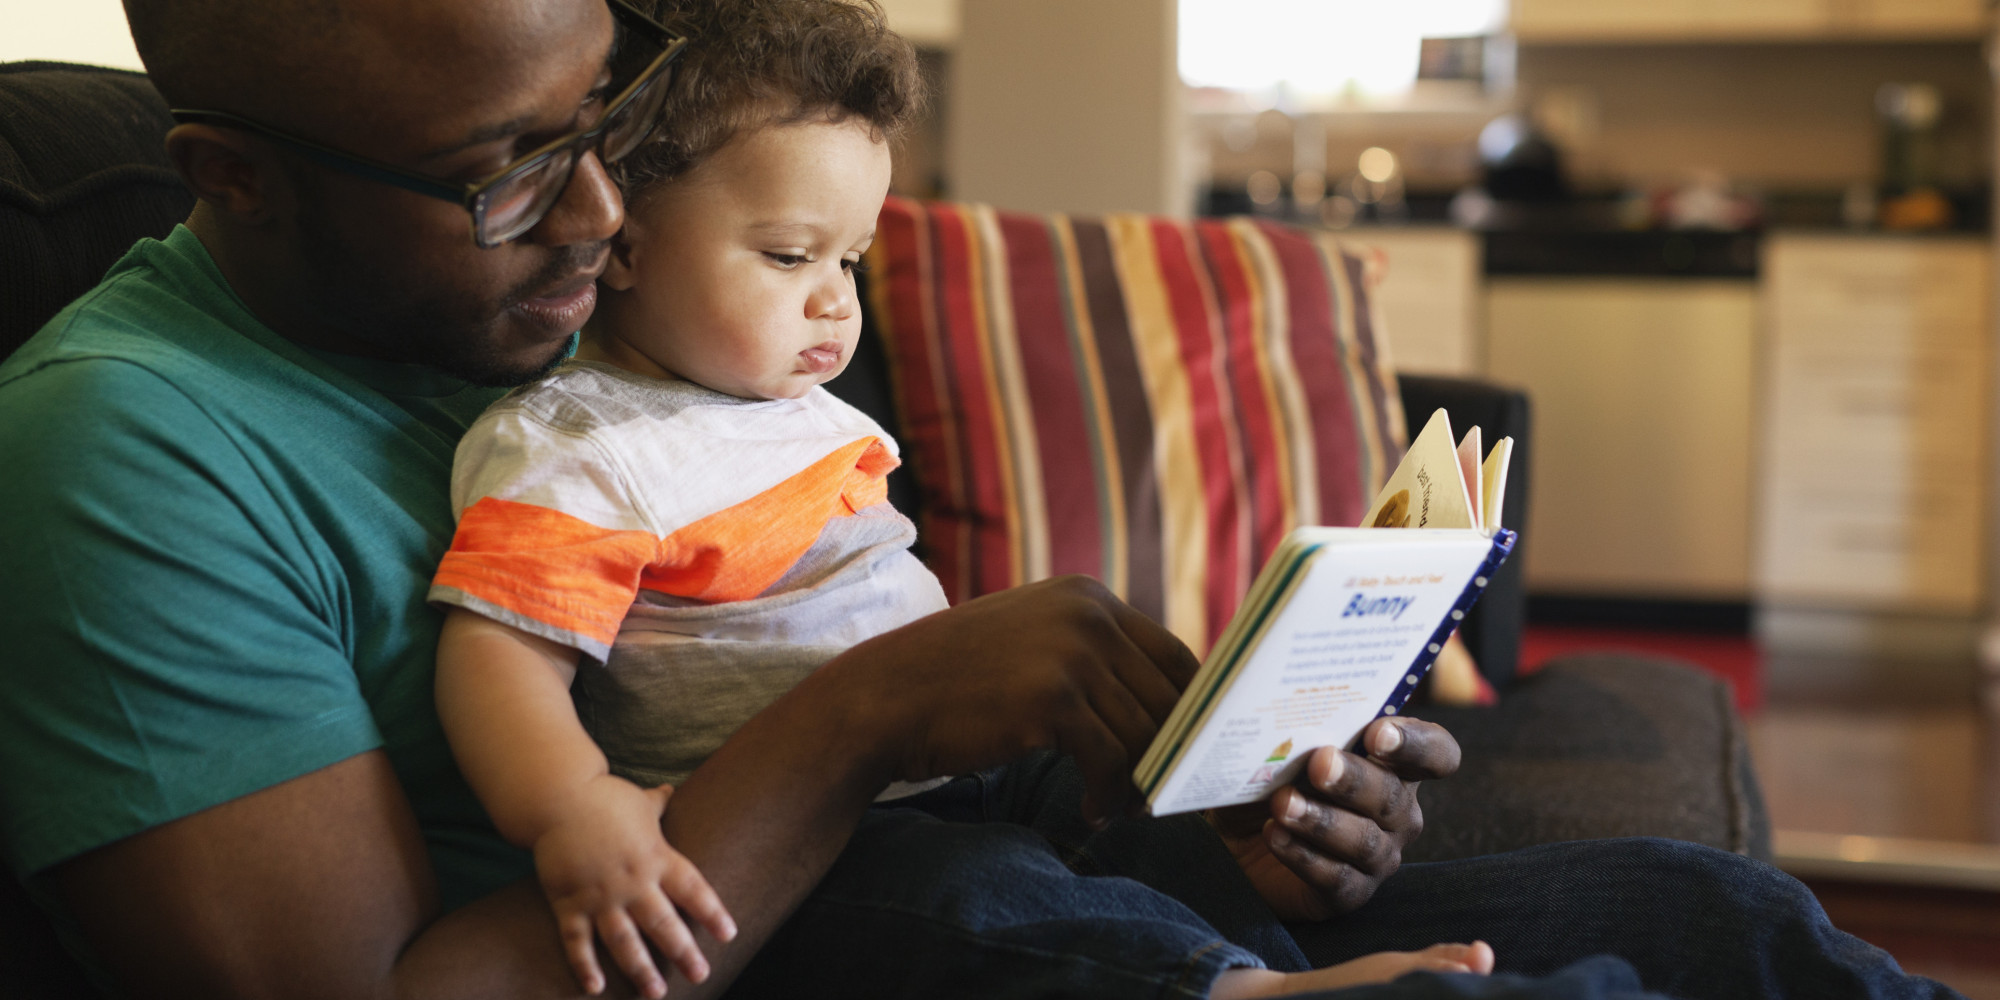 Father reading to baby on sofa